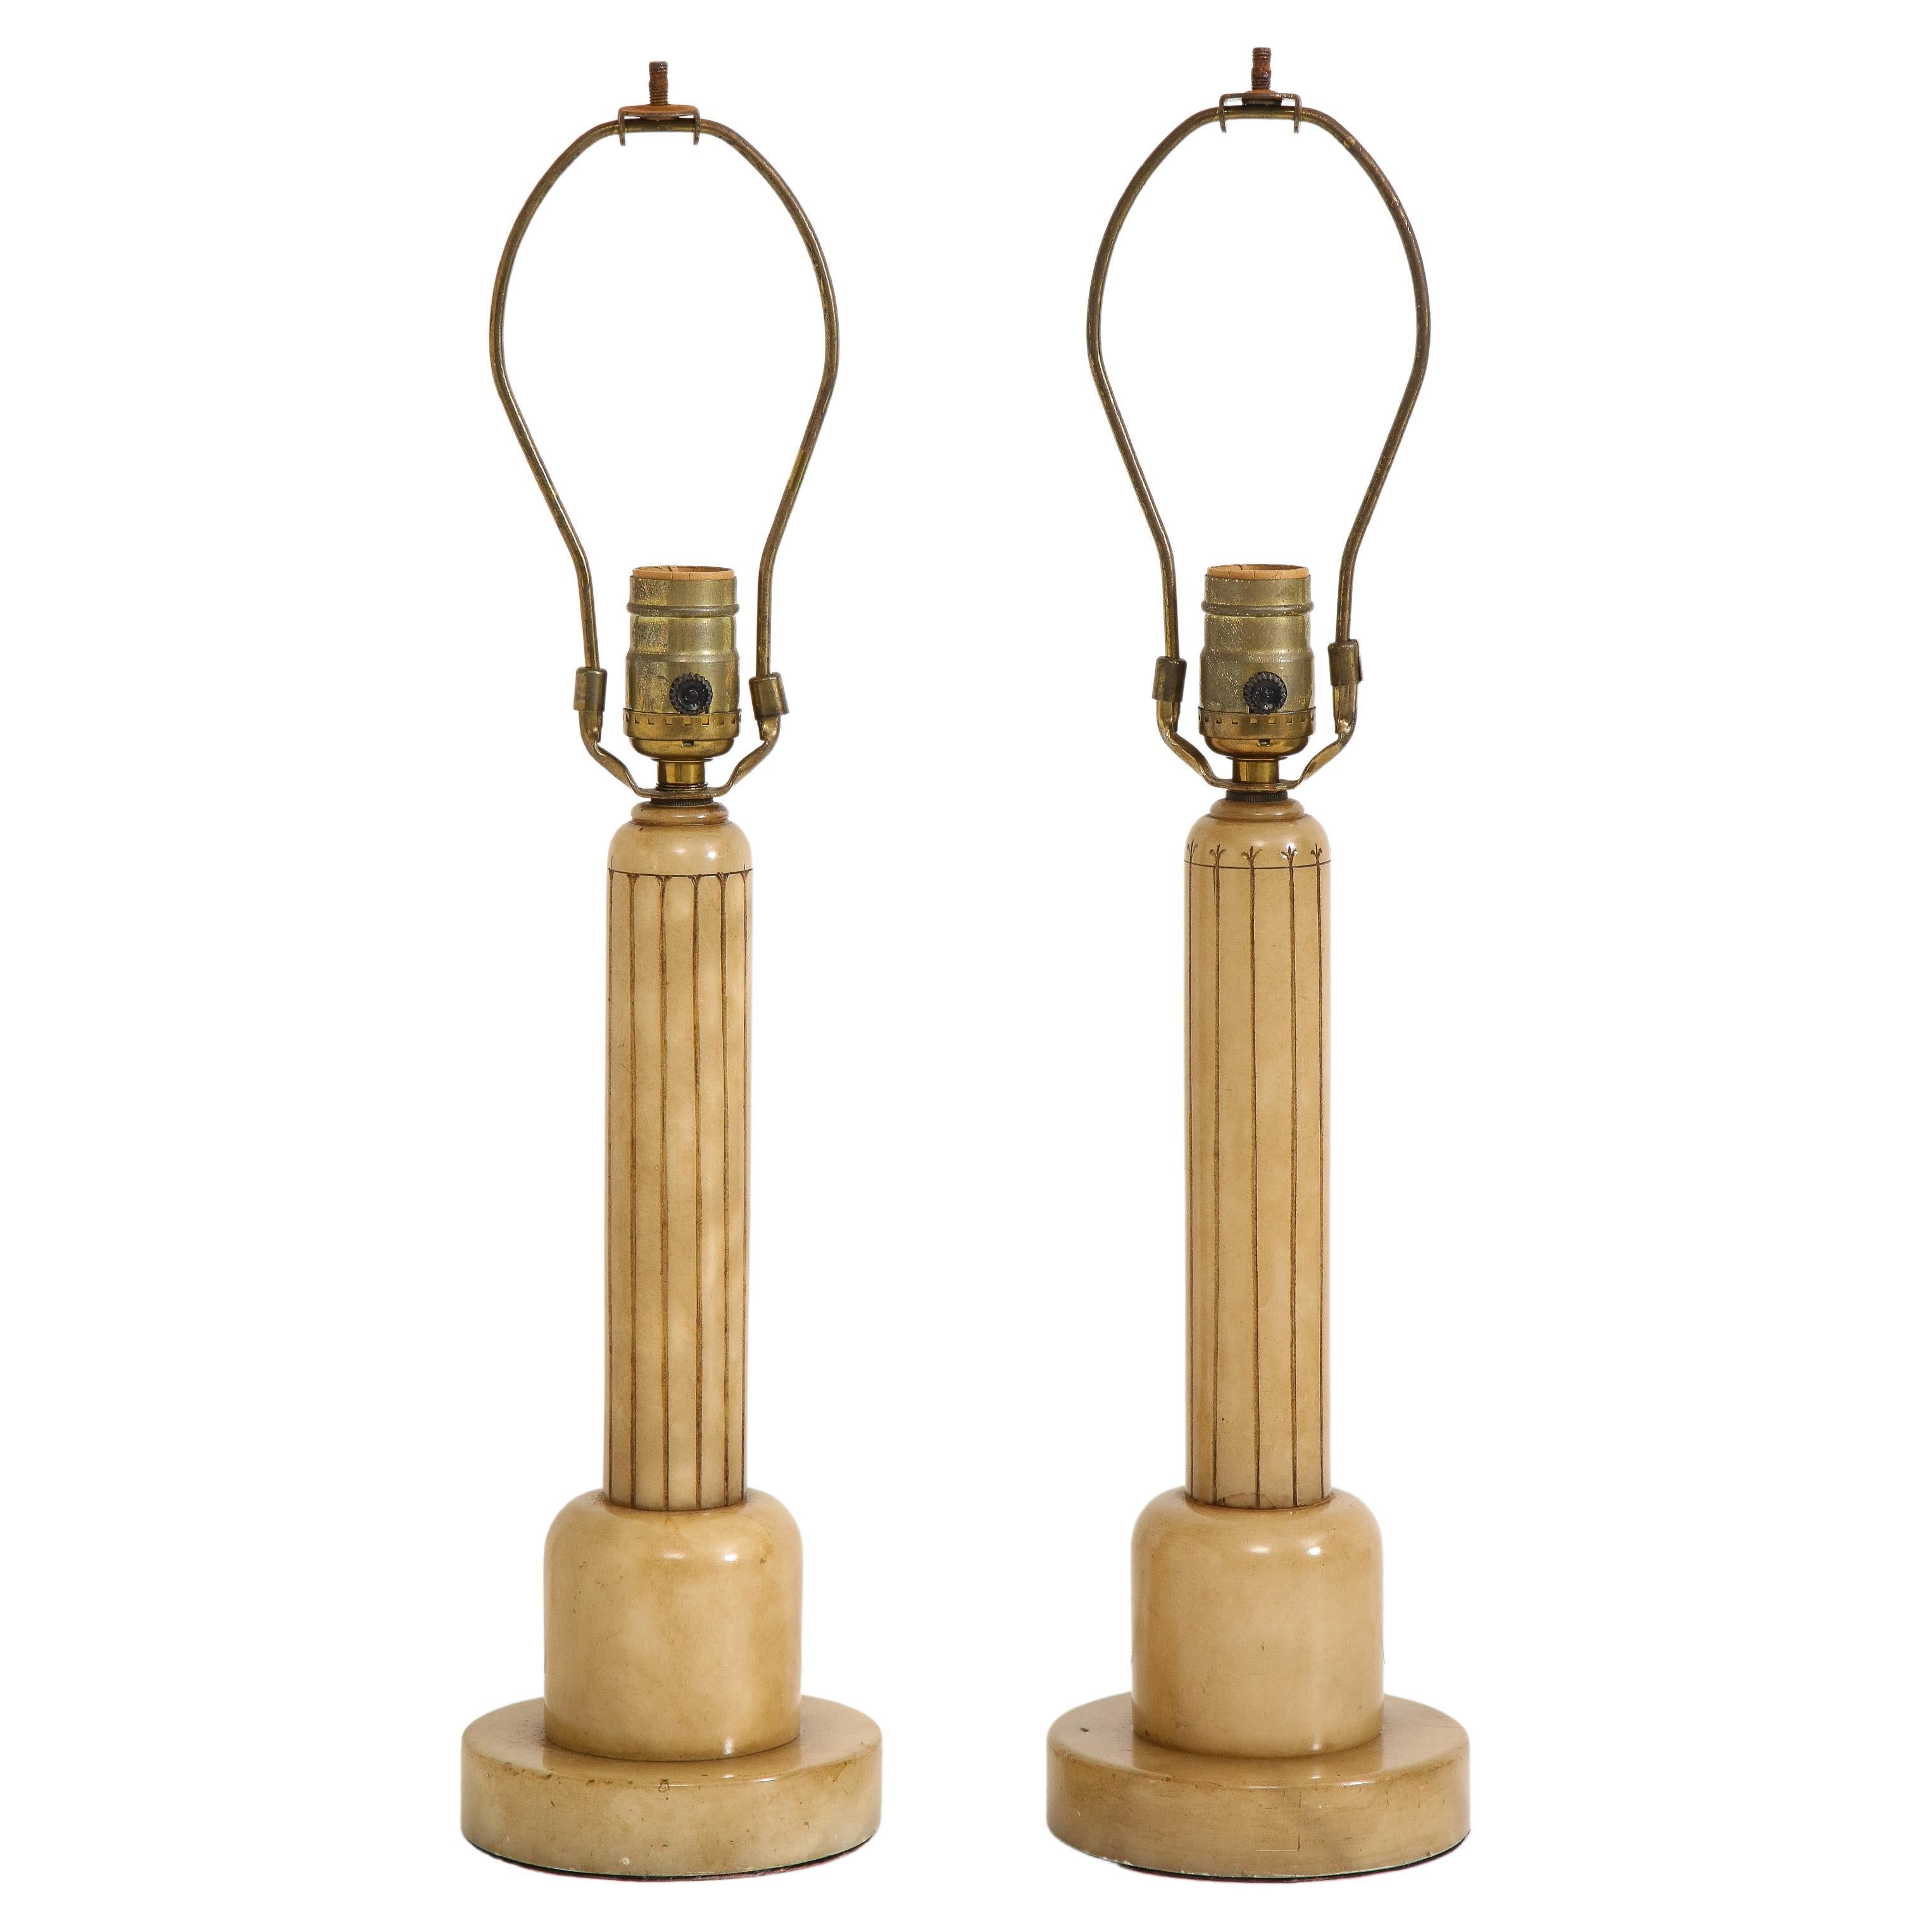 Pair of 1930s art deco polished alabaster table lamps with cream pleated shades. Alabaster bases feature incised design. 

Base 20.5